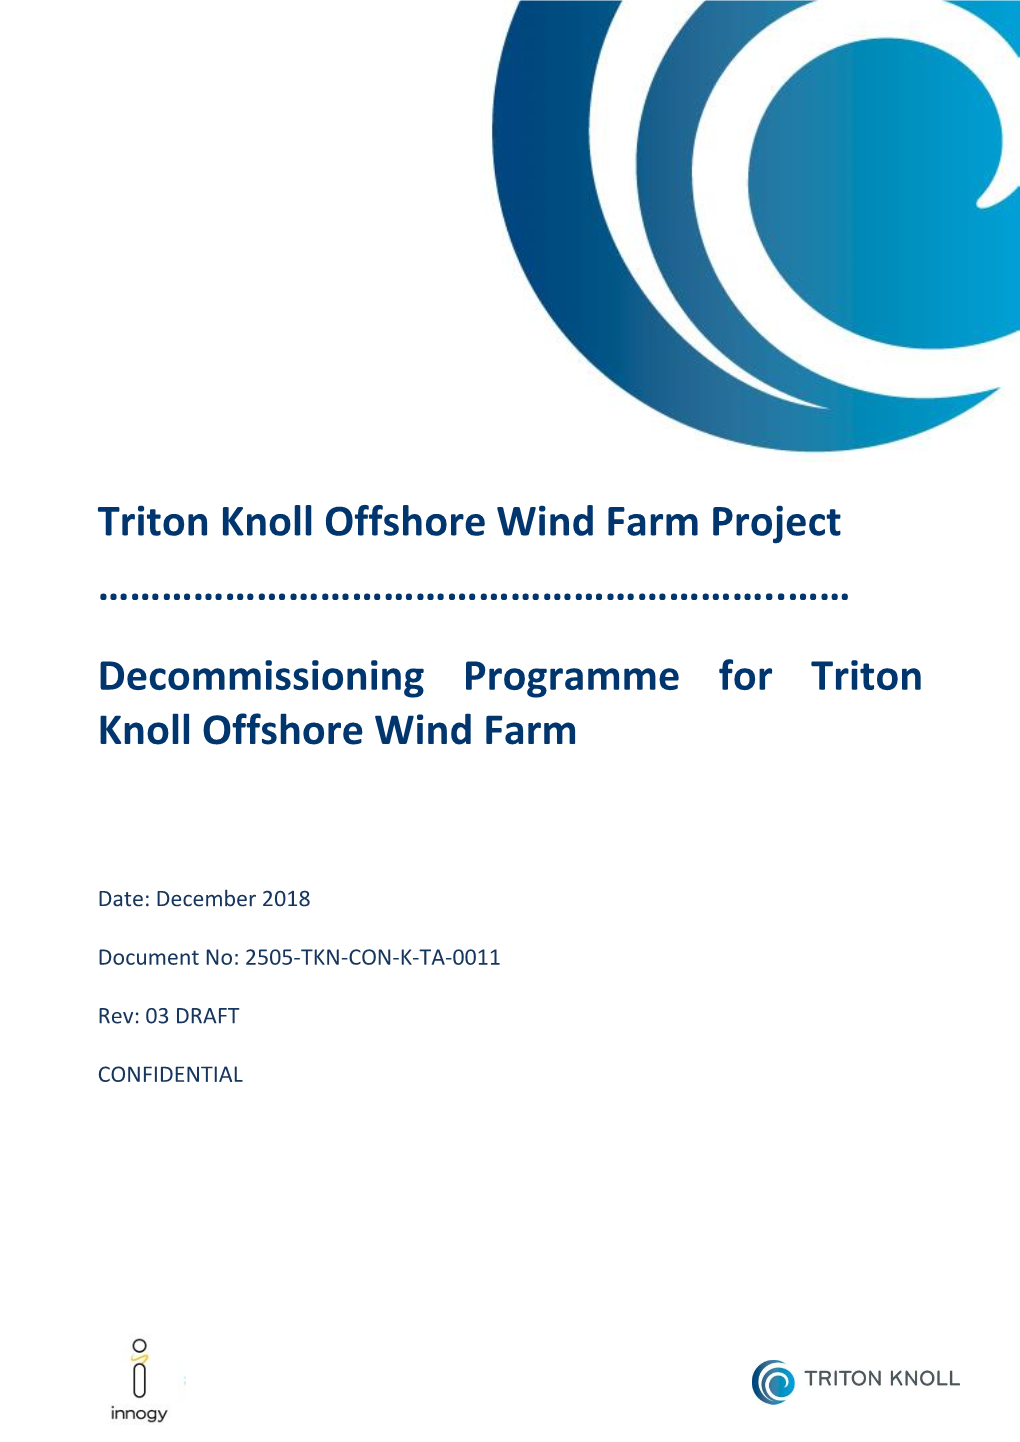 Decommissioning Programme for Triton Knoll Offshore Wind Farm